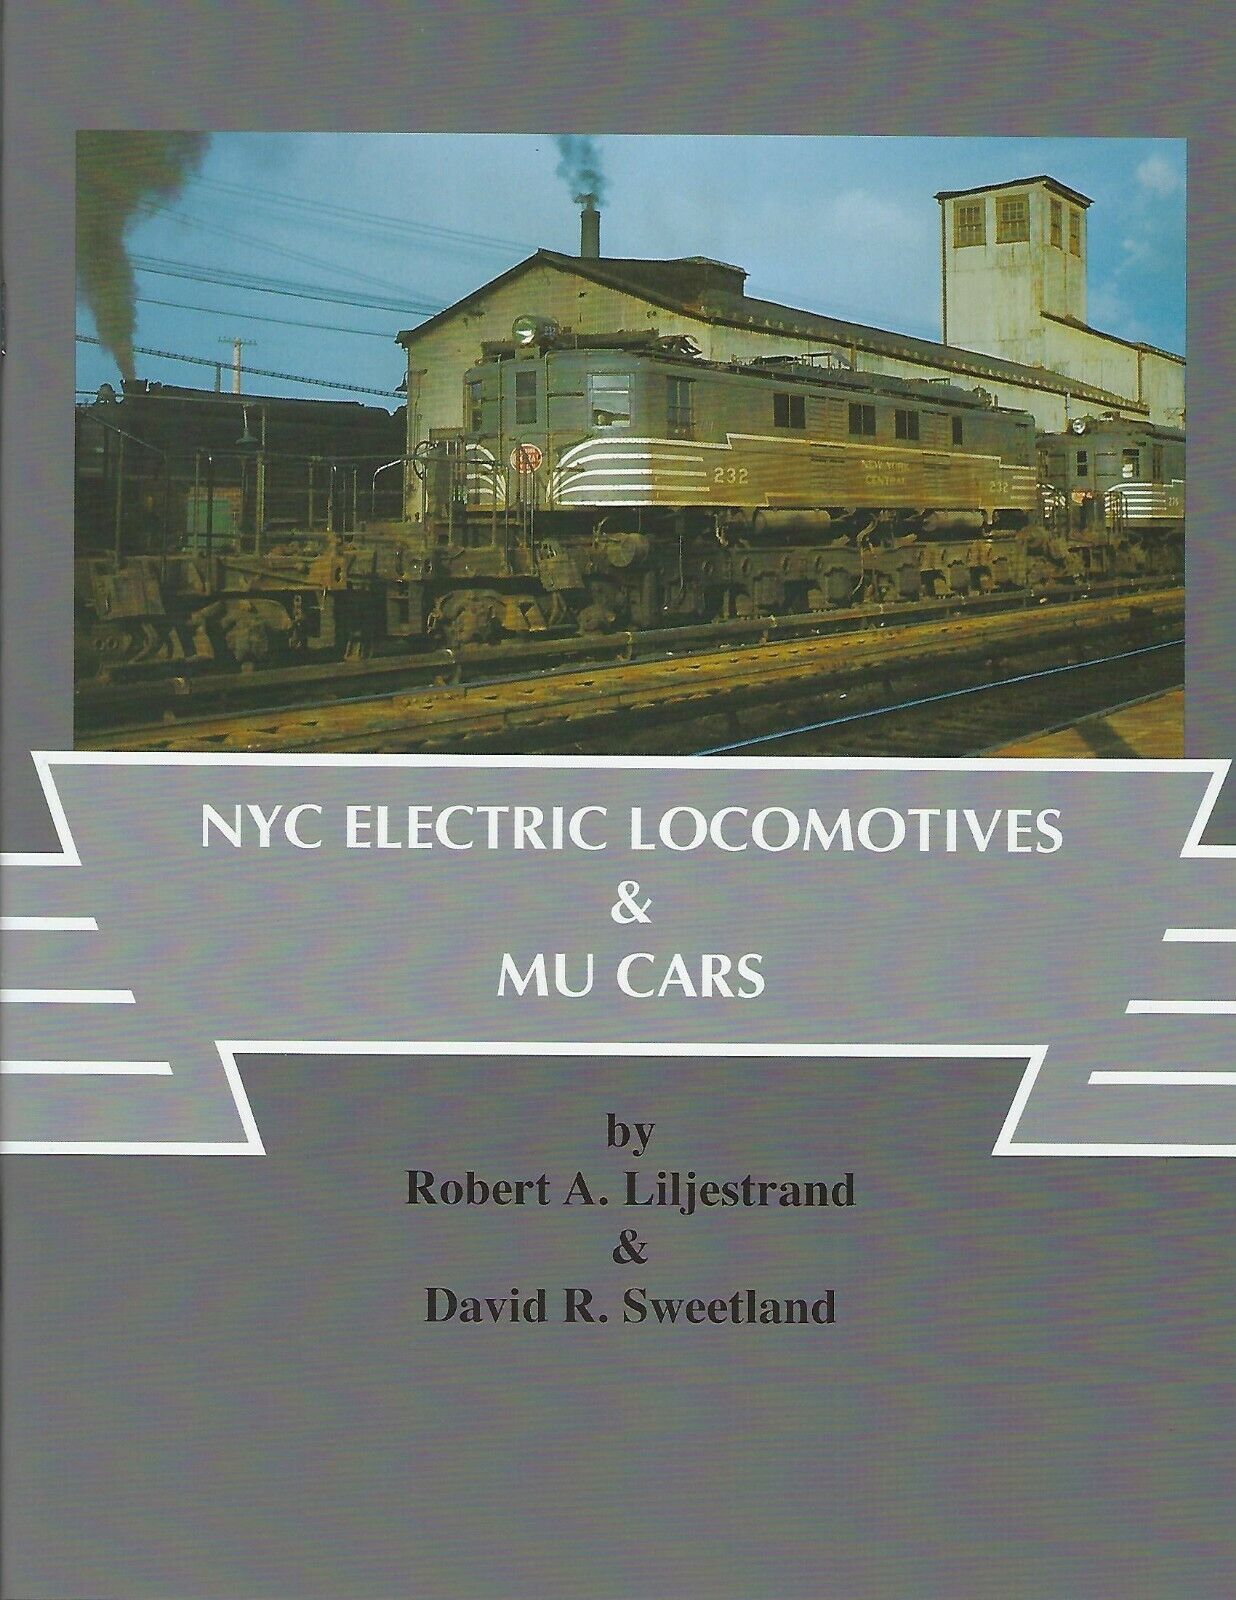 NYC Electric Locomotives & MU Cars (multiple-unit commuter cars) BRAND NEW BOOK